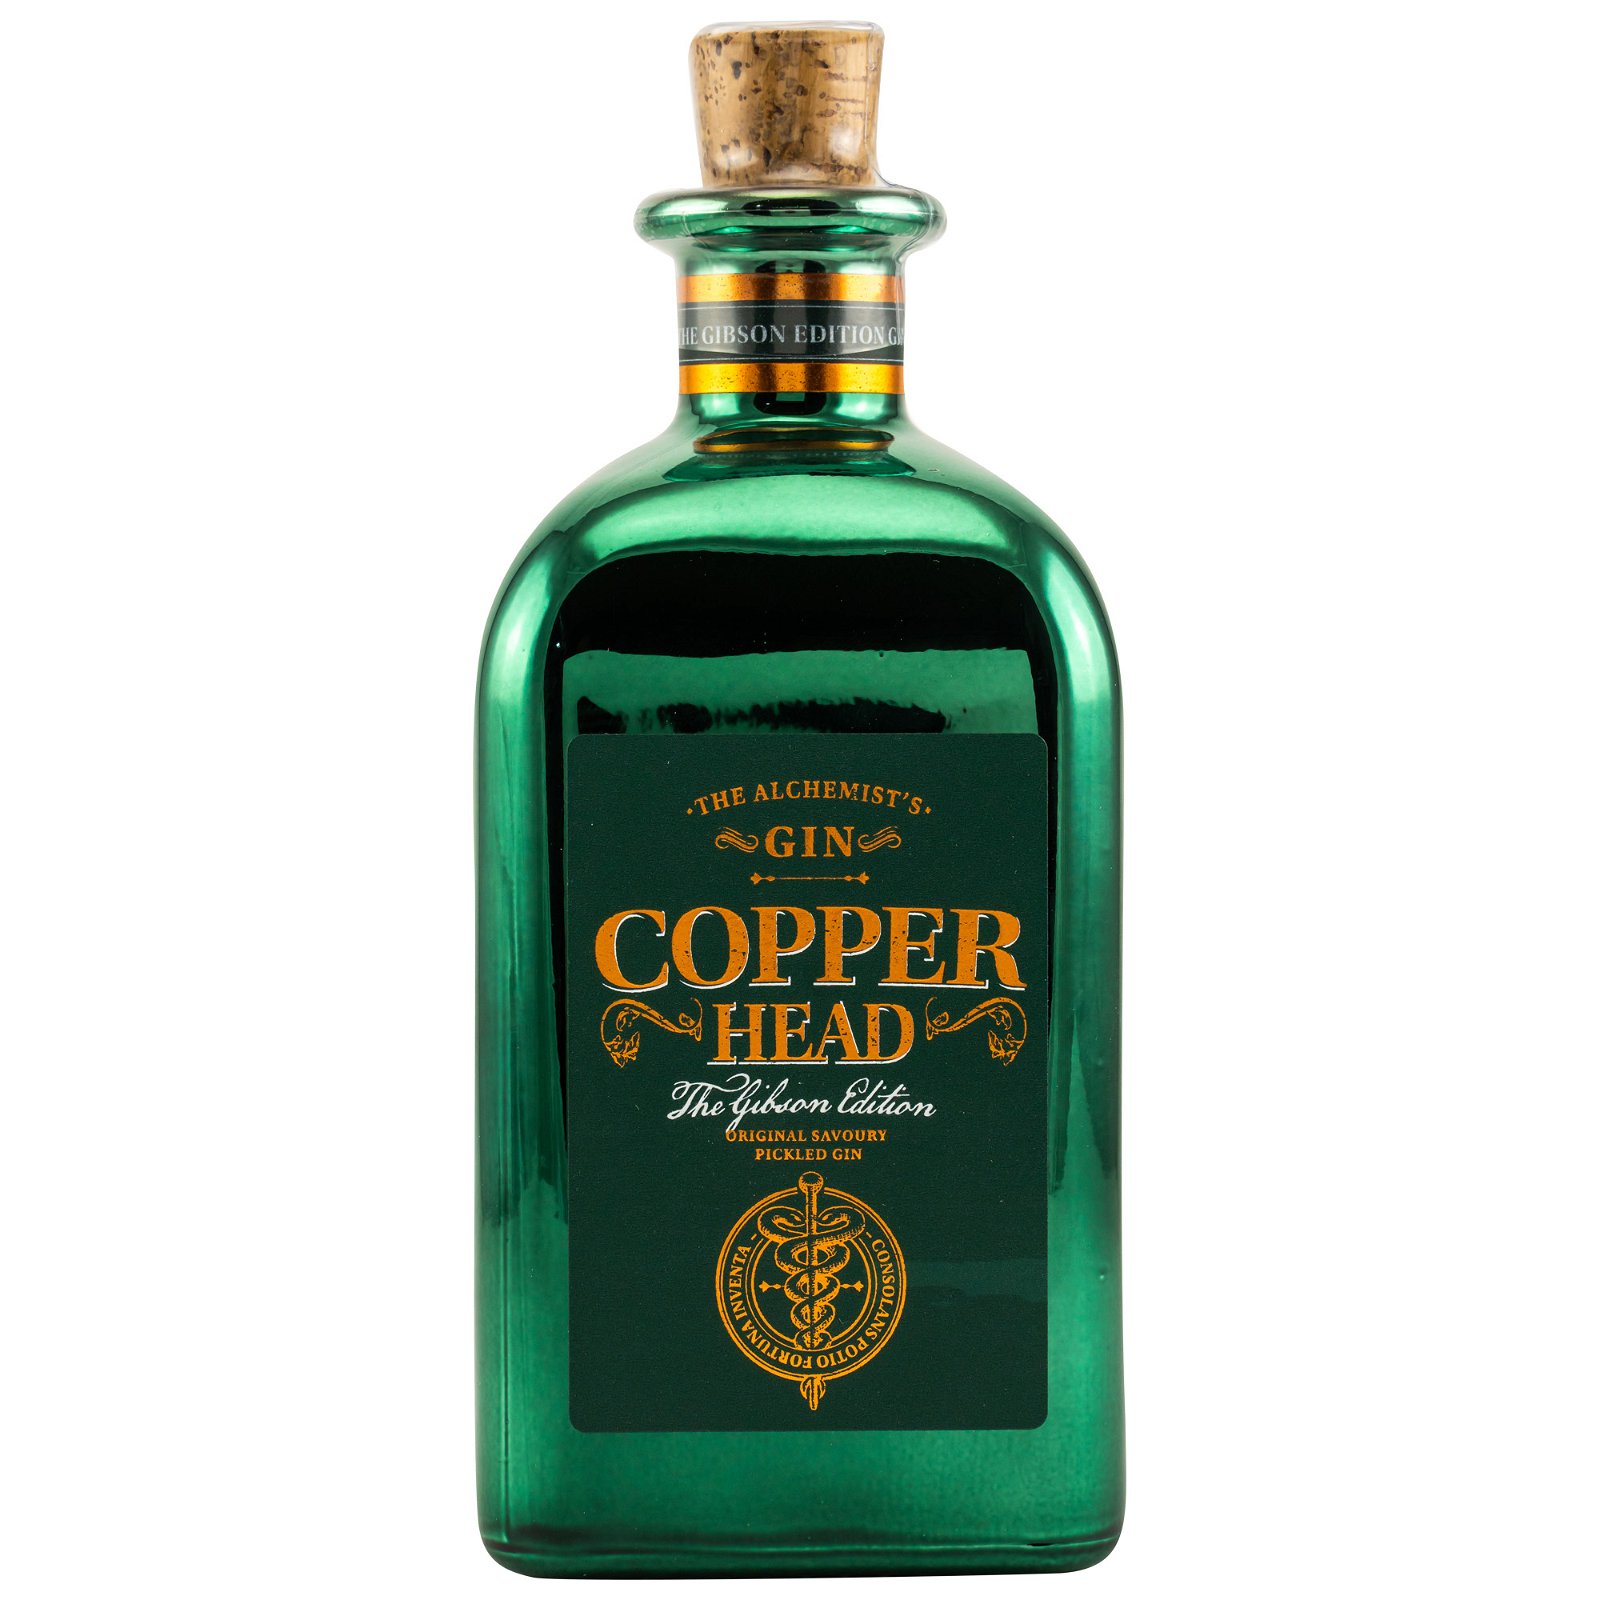 Copper Head Gin The Gibson Edition